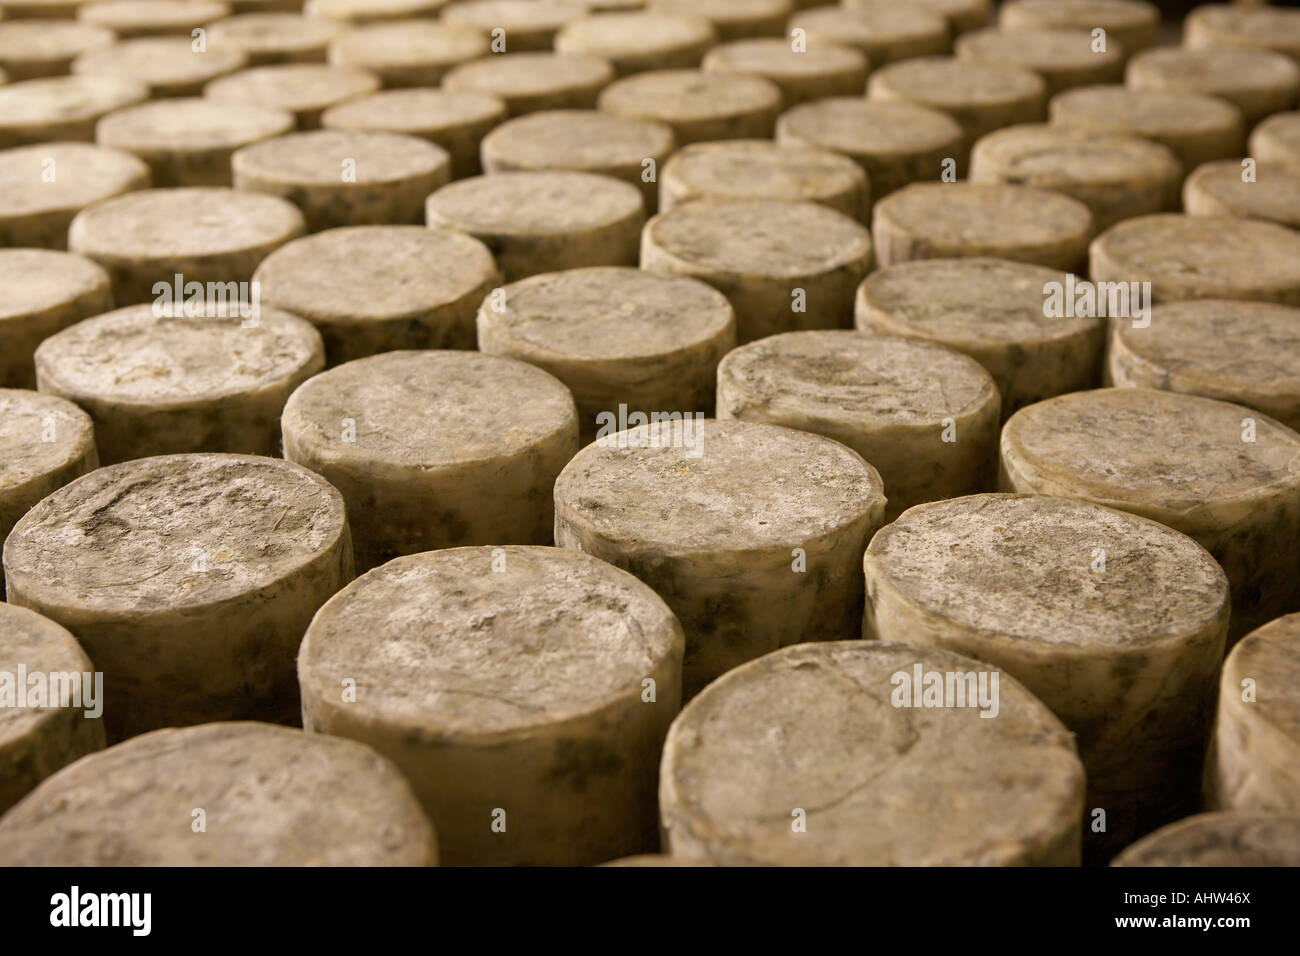 Many cylinders of cheese . Stock Photo